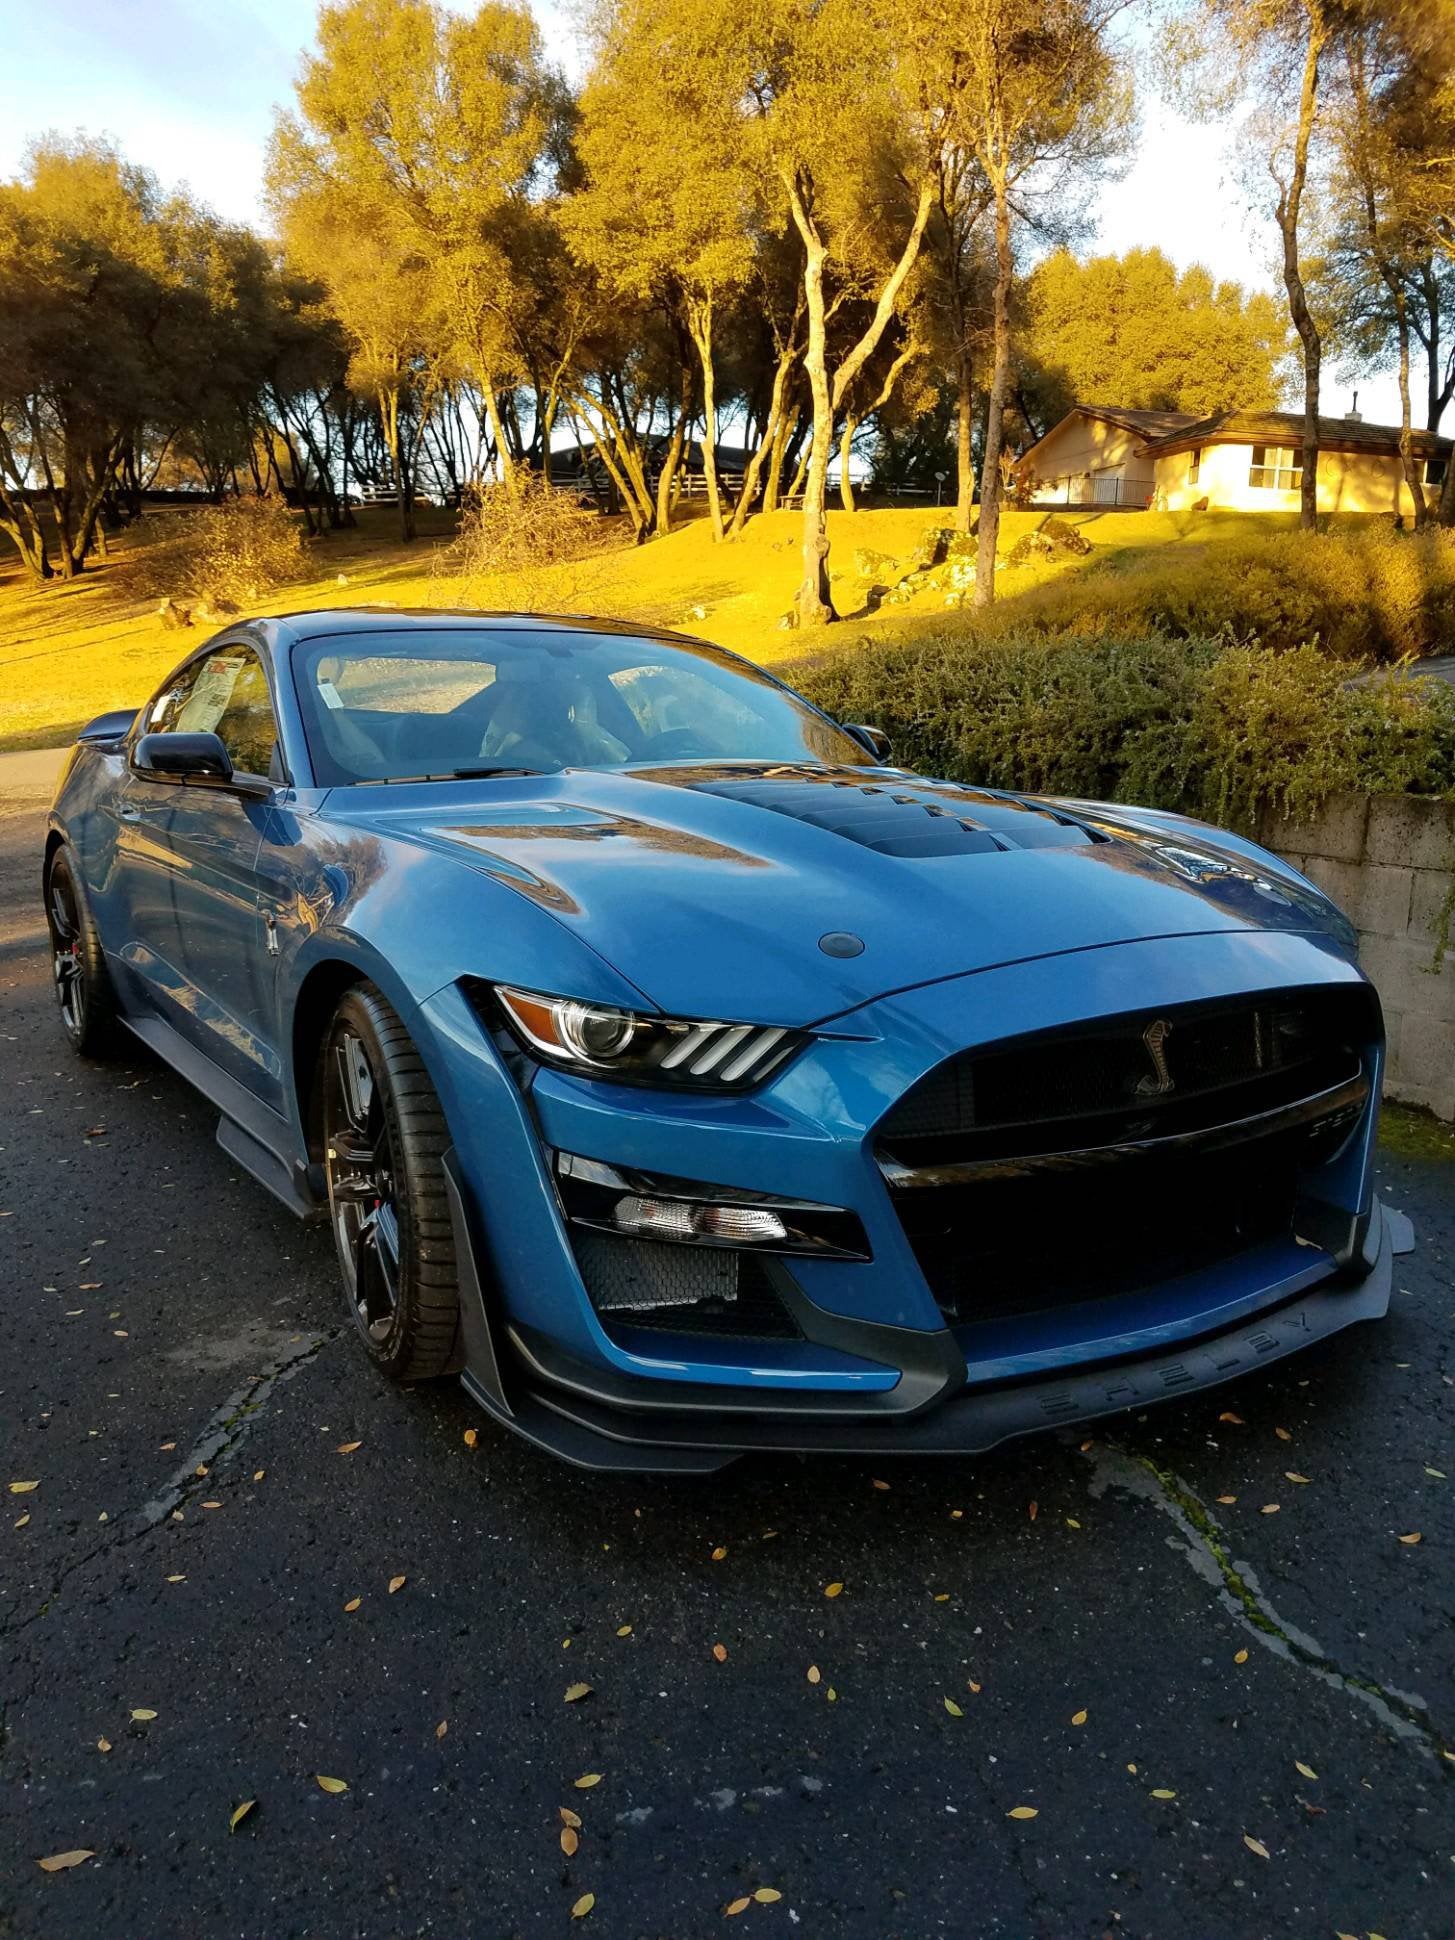 Not Sure of the Opinion of Mustang on this Sub, but Figured I’d share a Pic of the New Ride.